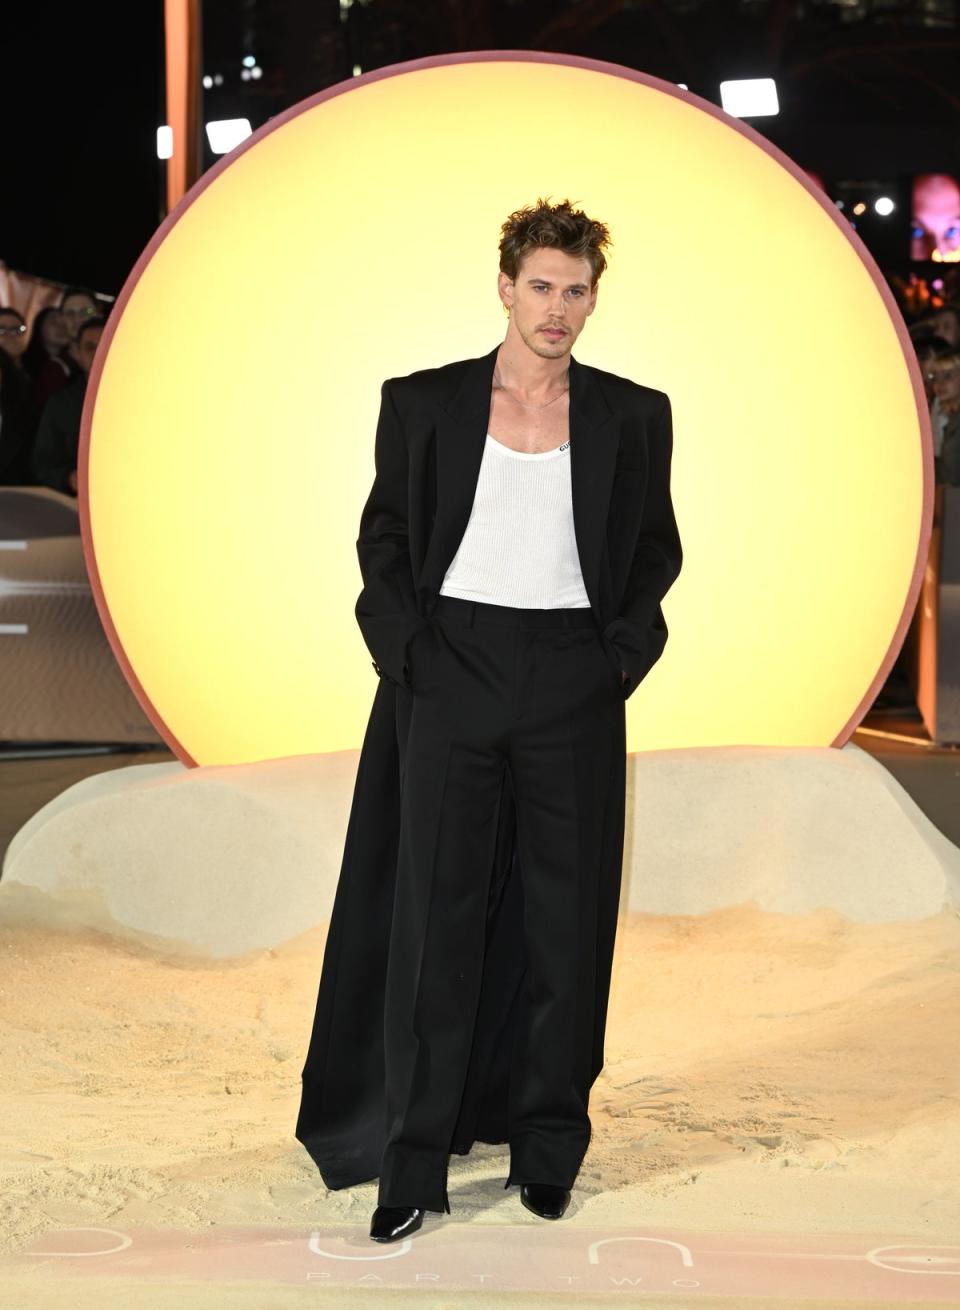 Austin Butler at the Dune: Part 2 premiere in London (Gareth Cattermole/Getty Images)